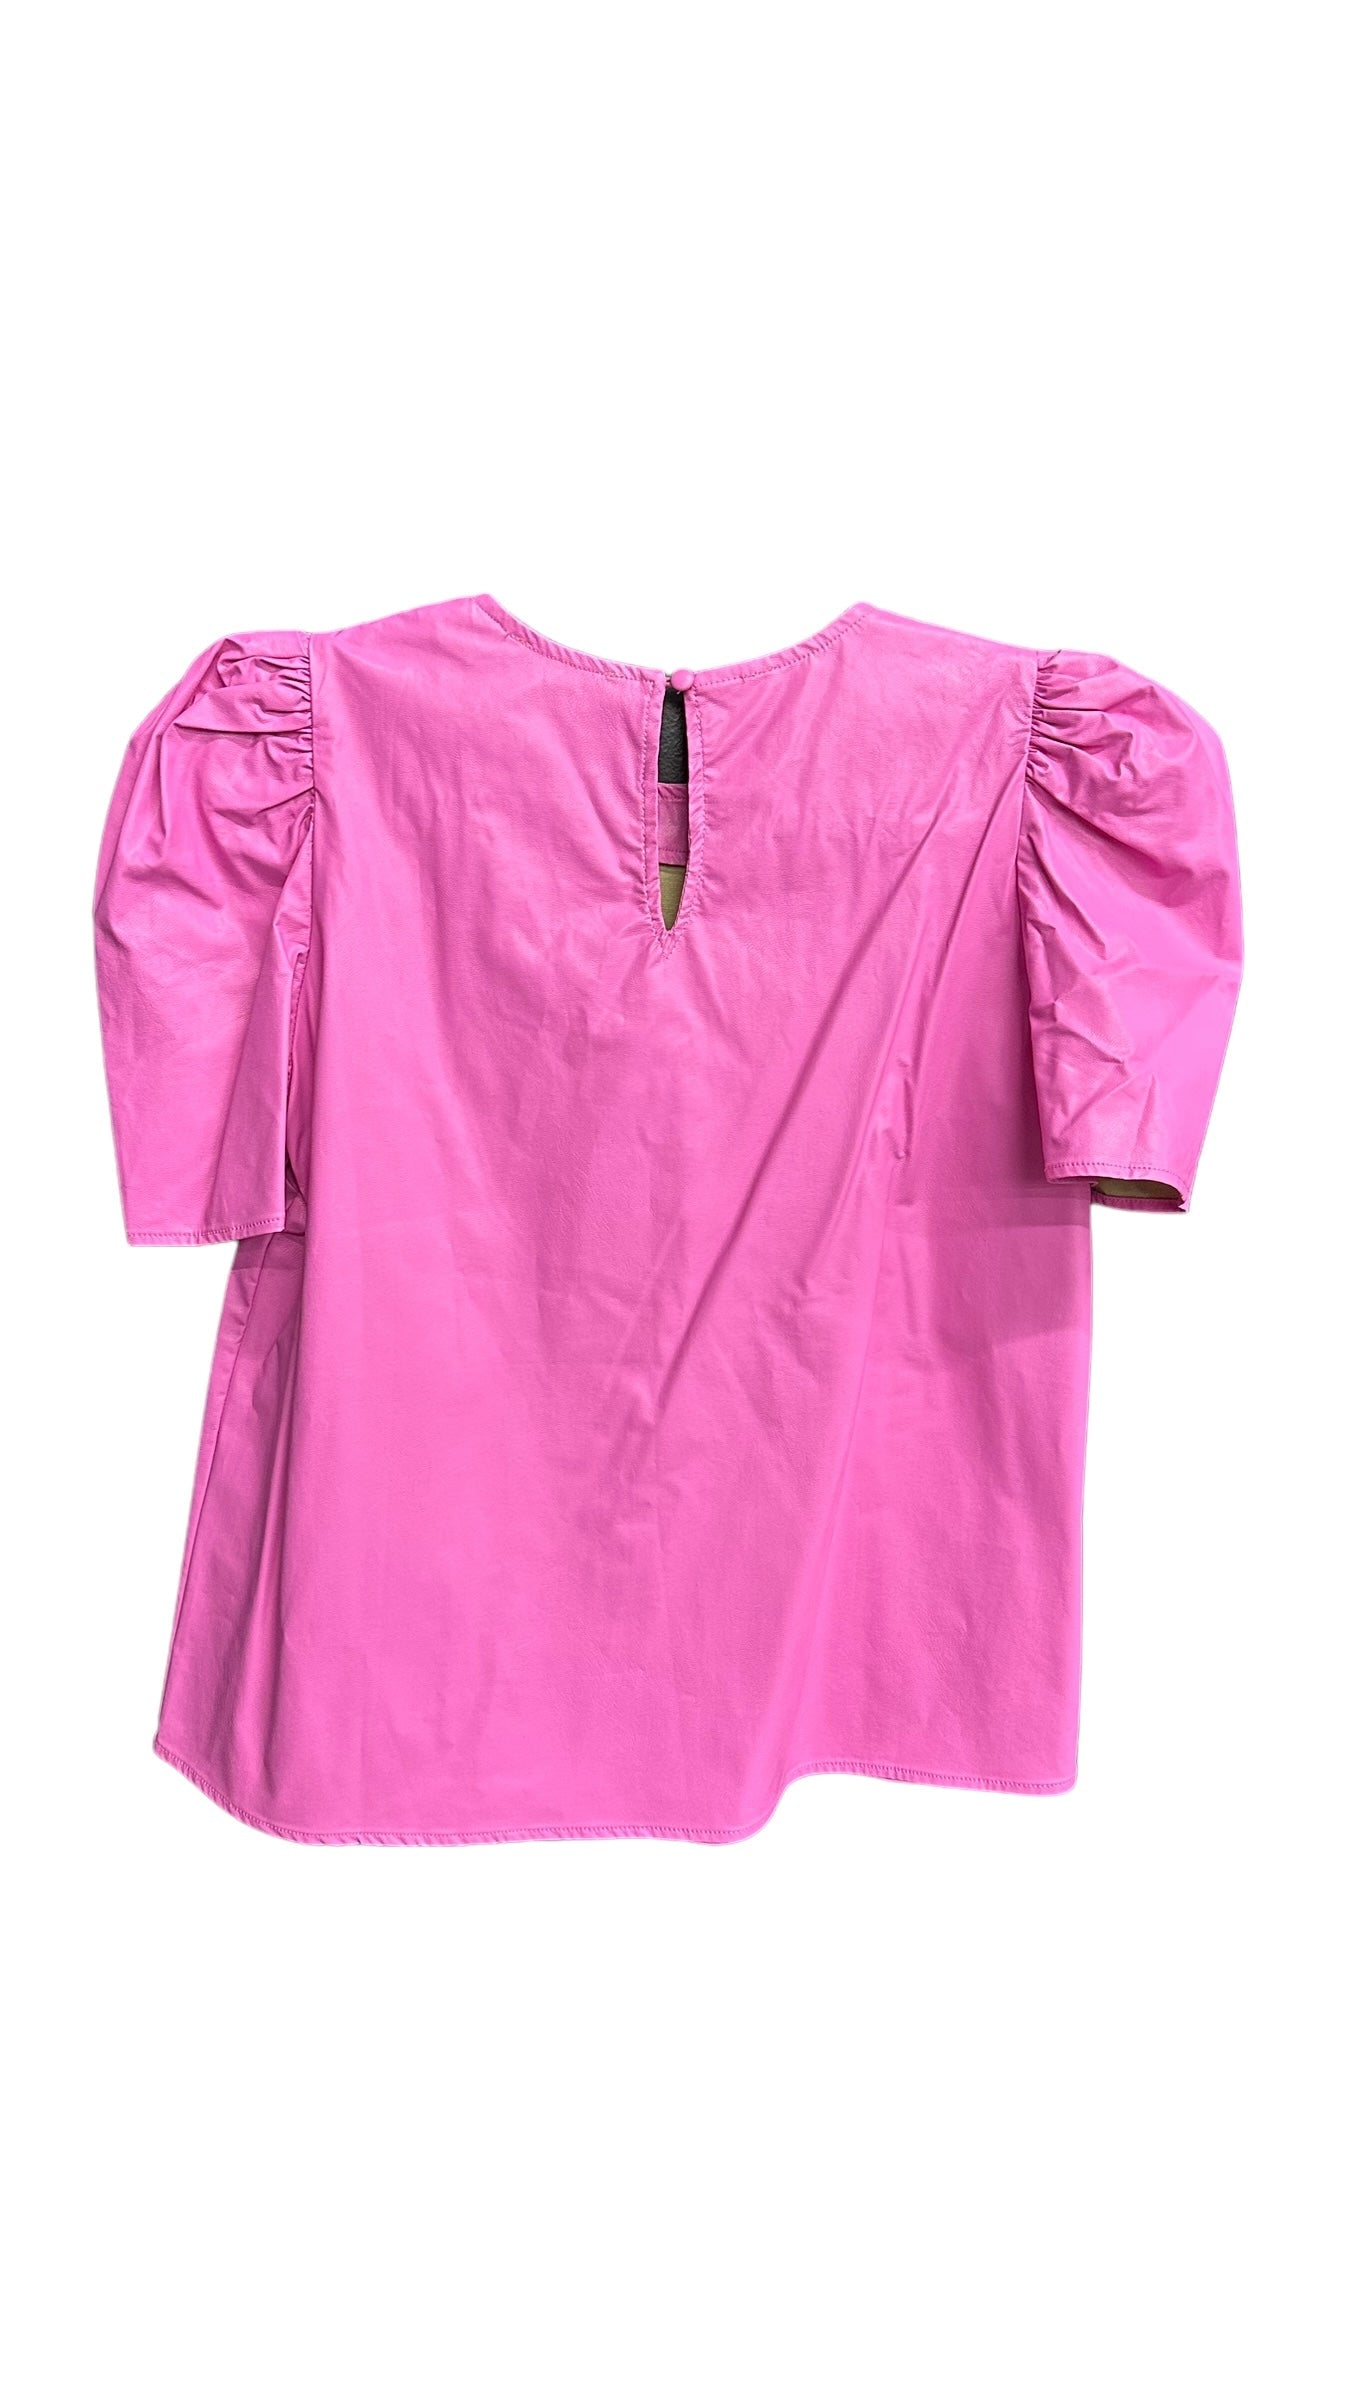 Pink Top Short Sleeve Thml, Size S